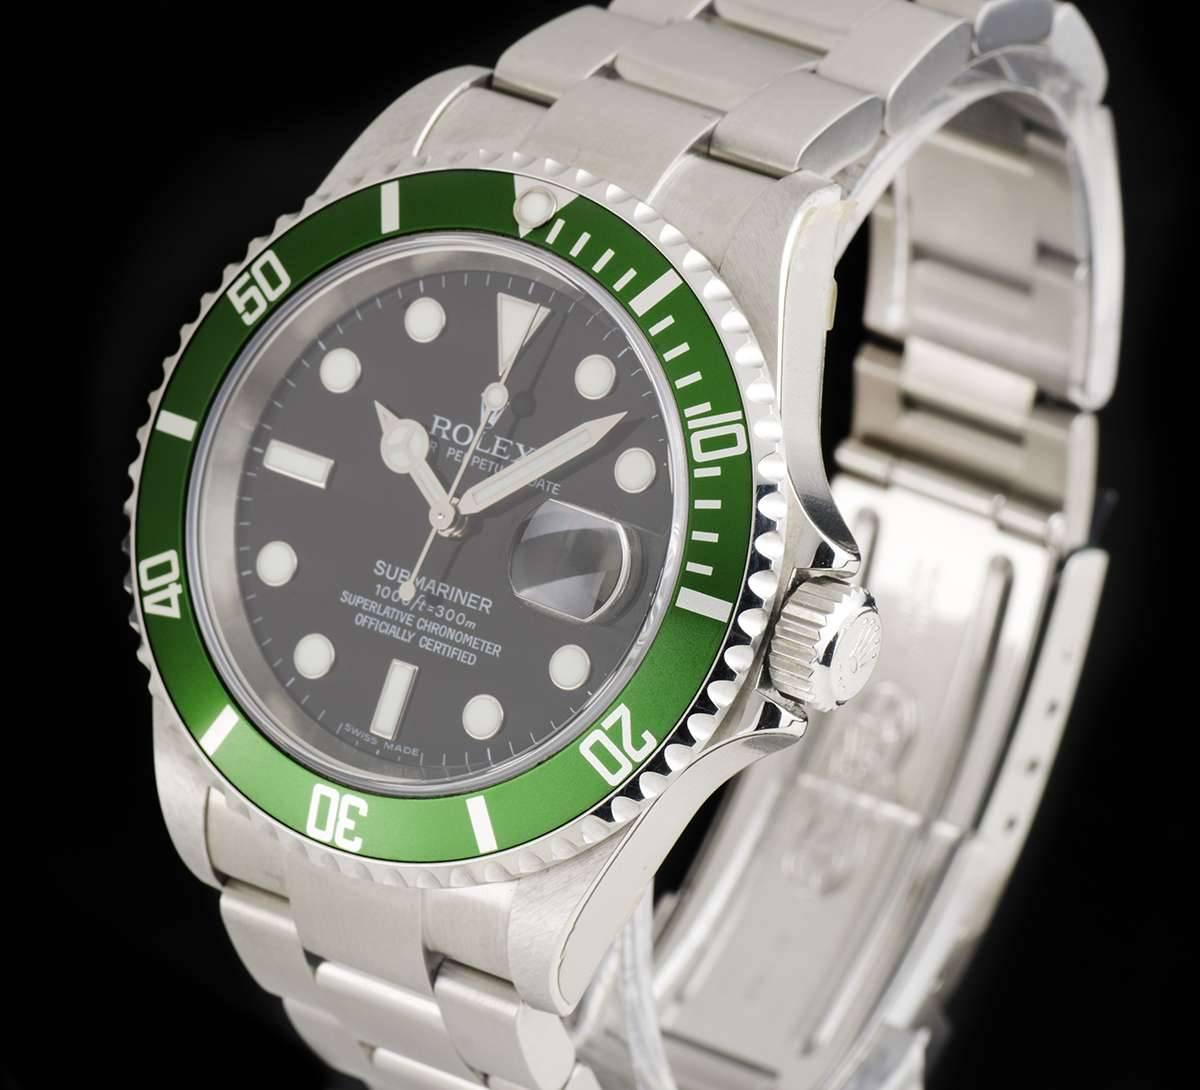 An Unworn Stainless Steel Oyster Perpetual Submariner Date NOS Gents Wristwatch, black dial with applied hour markers, date at 3 0'clock, a stainless steel uni-directional rotating bezel with a green bezel insert, a stainless steel oyster bracelet